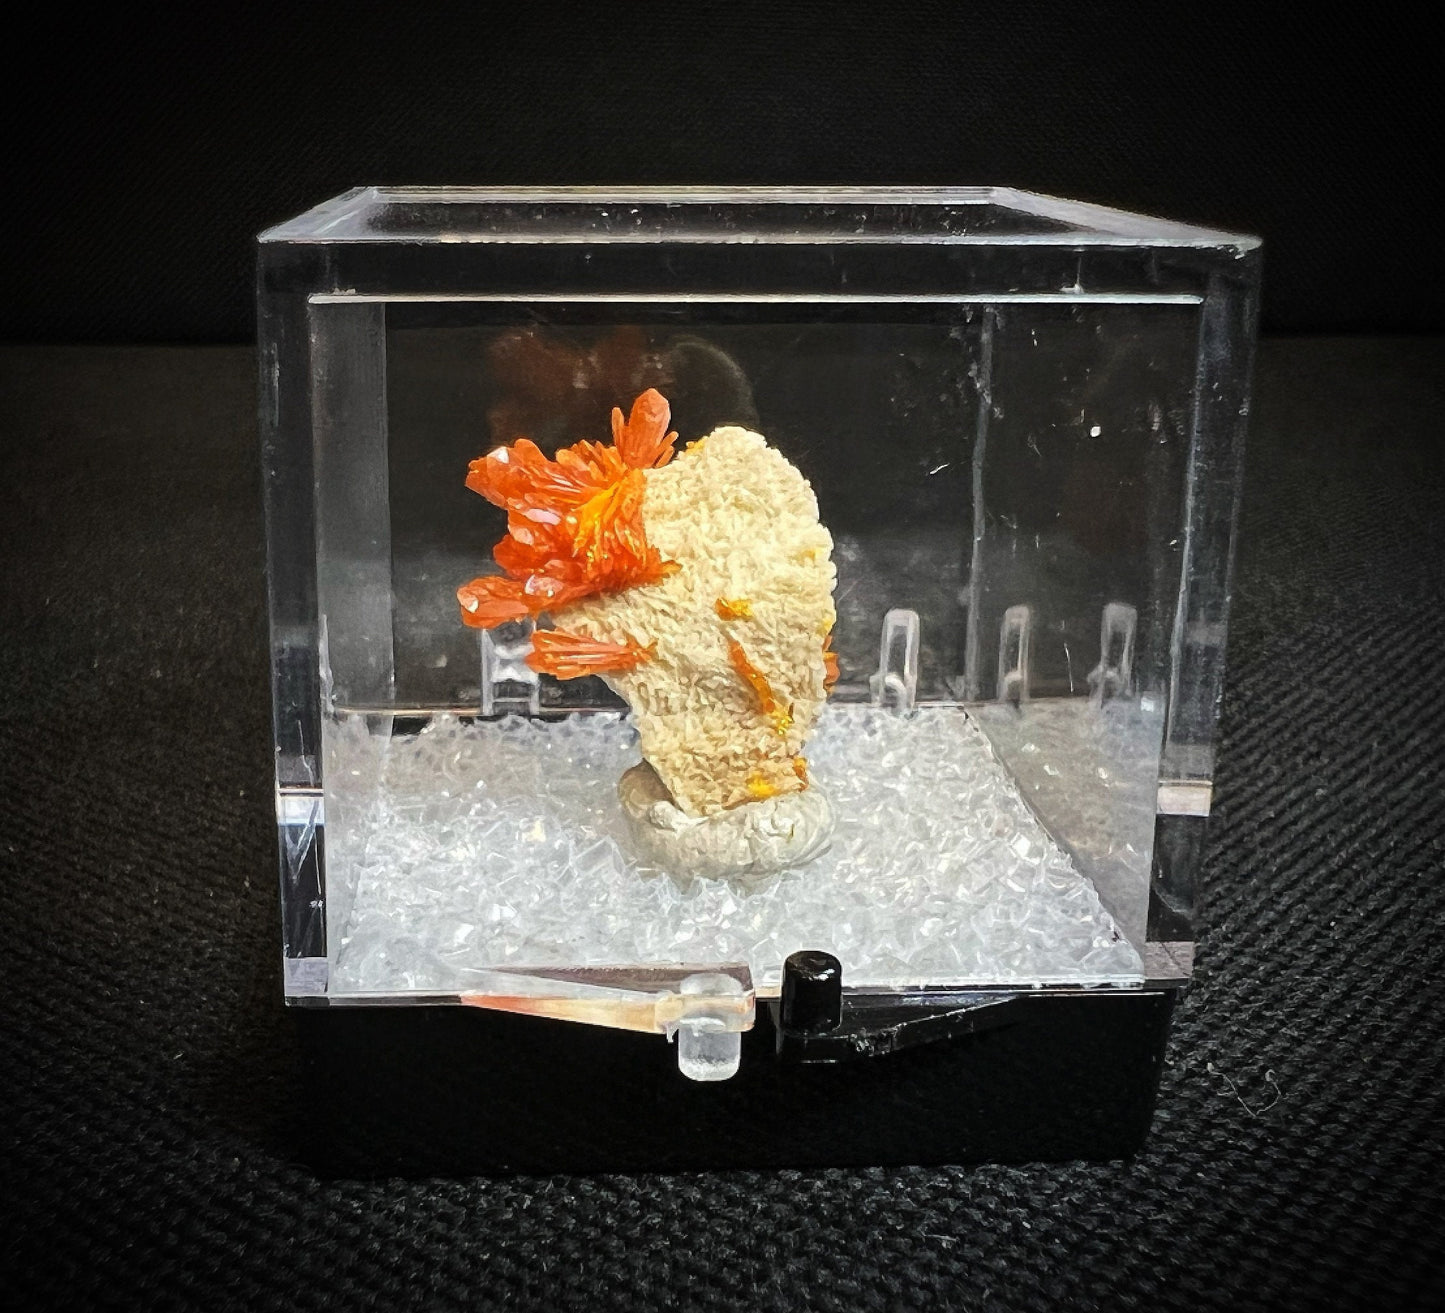 Orpiment On Barite From El'brusskiy Arsenic Mine -Collectors Piece, Home Décor, Gift (Box Included)